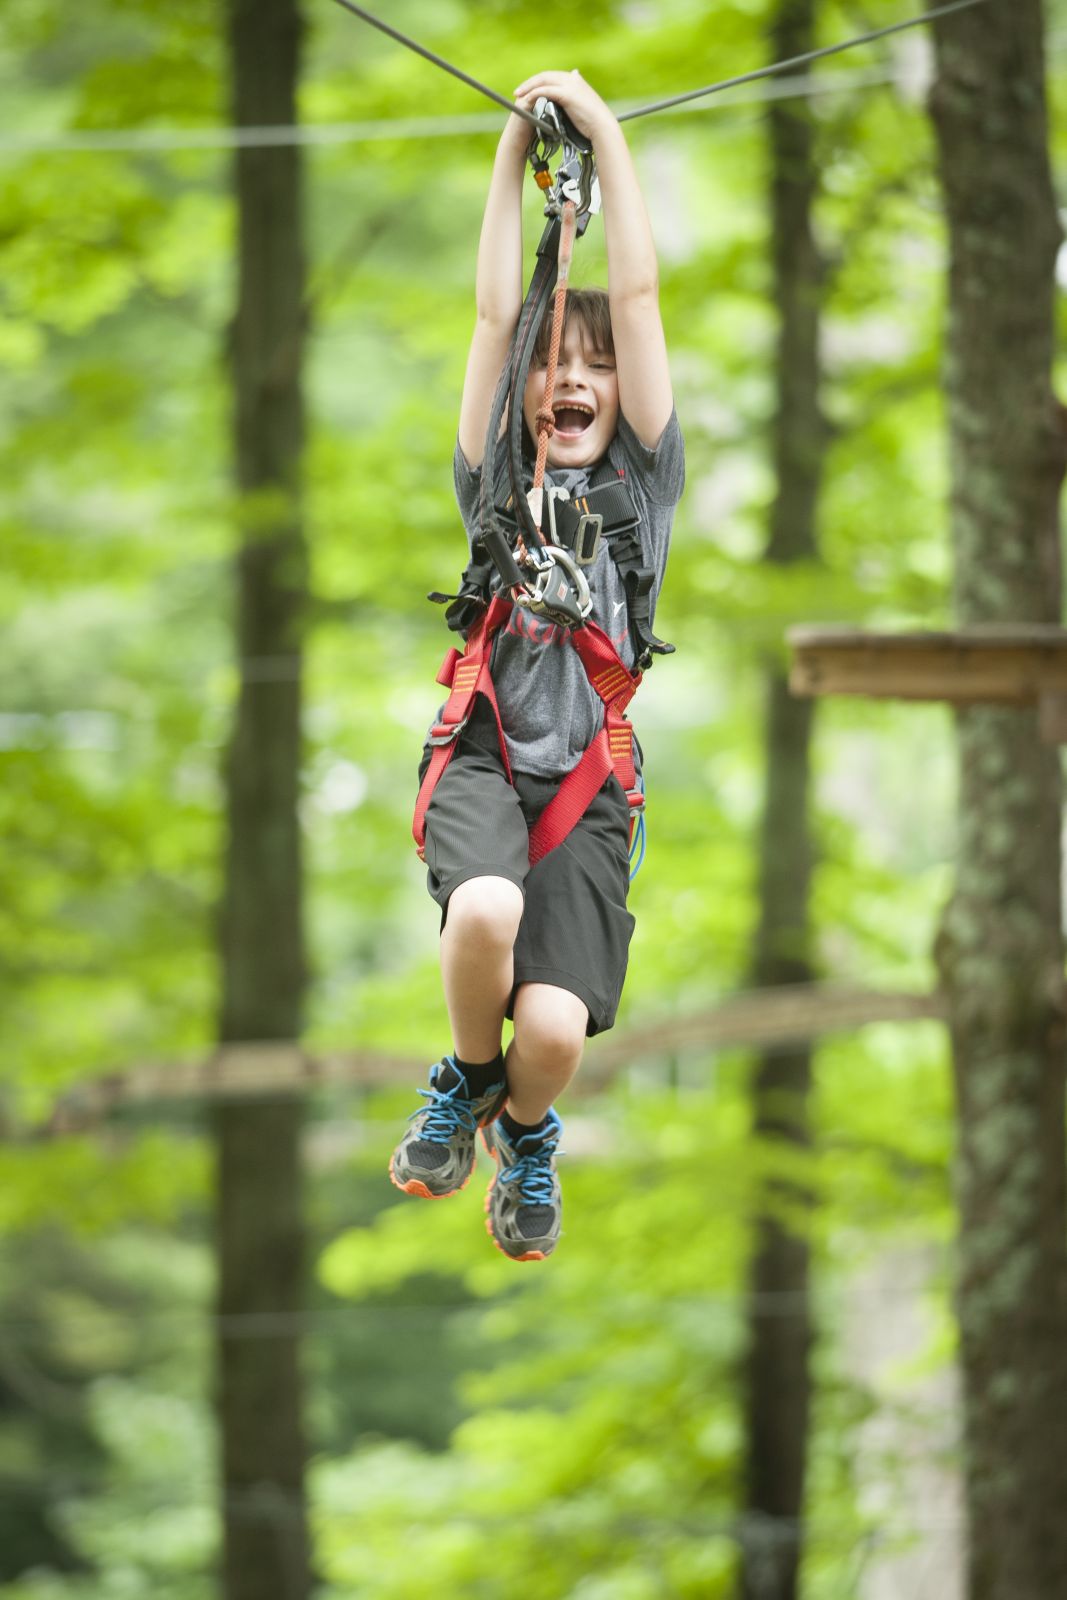 Treetop Thrill Seekers Reach New Heights Main Photo